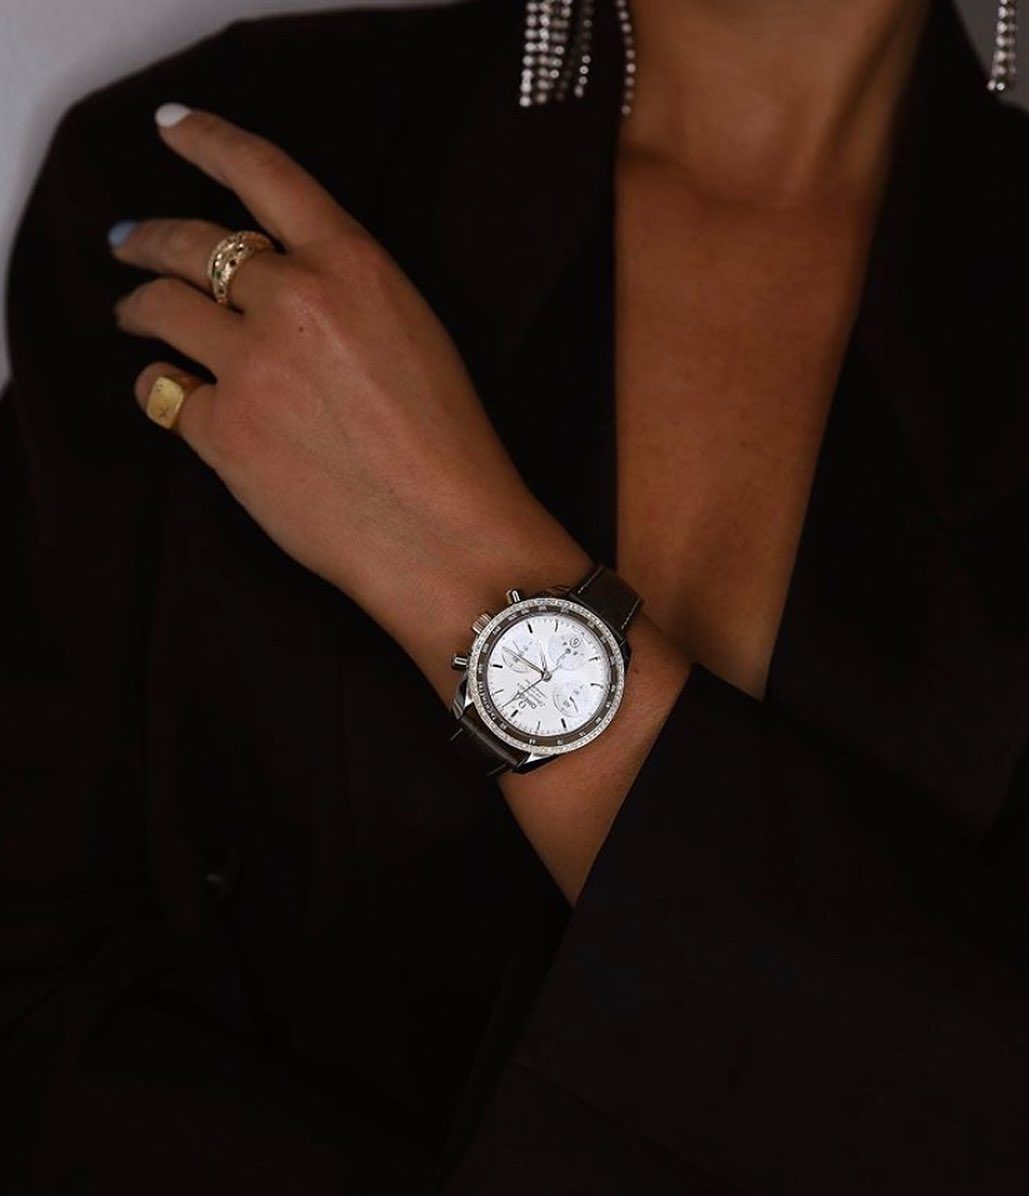 From Dubai to Warsaw, Women Are Forming Their Own Watch Clubs